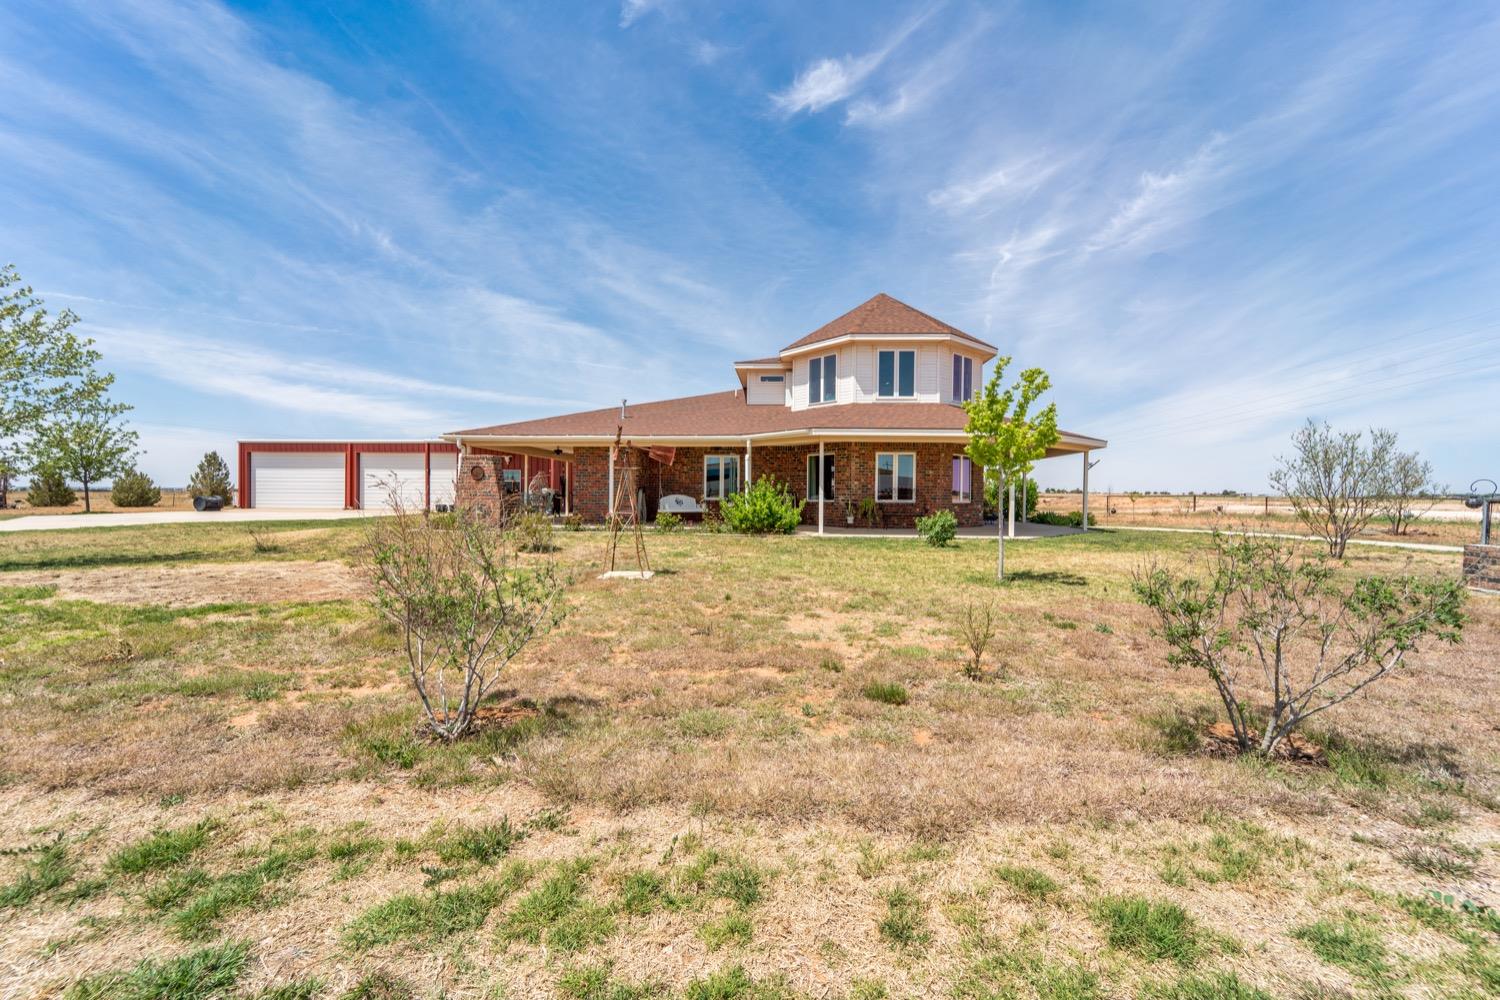 Welcome to North University Ranchettes where you'll fall in love with this custom built home on 1 acre of land. Included are a total of 4 beds, 3.5 baths, a shop with a 4 car garage and gated access. The home was finished in 2018 and boasts a full wrap-around porch, a spray foam insulated main house w/3 beds, 2.5 baths and a 1,200 sf shop and 600 sf 1 bed, 1 bath apartment with laundry and kitchenette. The main house offers wood floors throughout, custom tile floors in the kitchen and bathrooms, with 36'' doors throughout and a easy access in the marble lined showers in both the house and apartment. The first floor has an open floor plan with a dual access isolated master suite, private guest suite and a gourmet kitchen. You'll enjoy the large island with seating area, a gas cooktop, all black stainless appliances and a KitchenAid Refrigerator that conveys. The 1-acre lot offers flower beds and irrigated raised vegetable beds, a well & septic. Schedule your showing today.